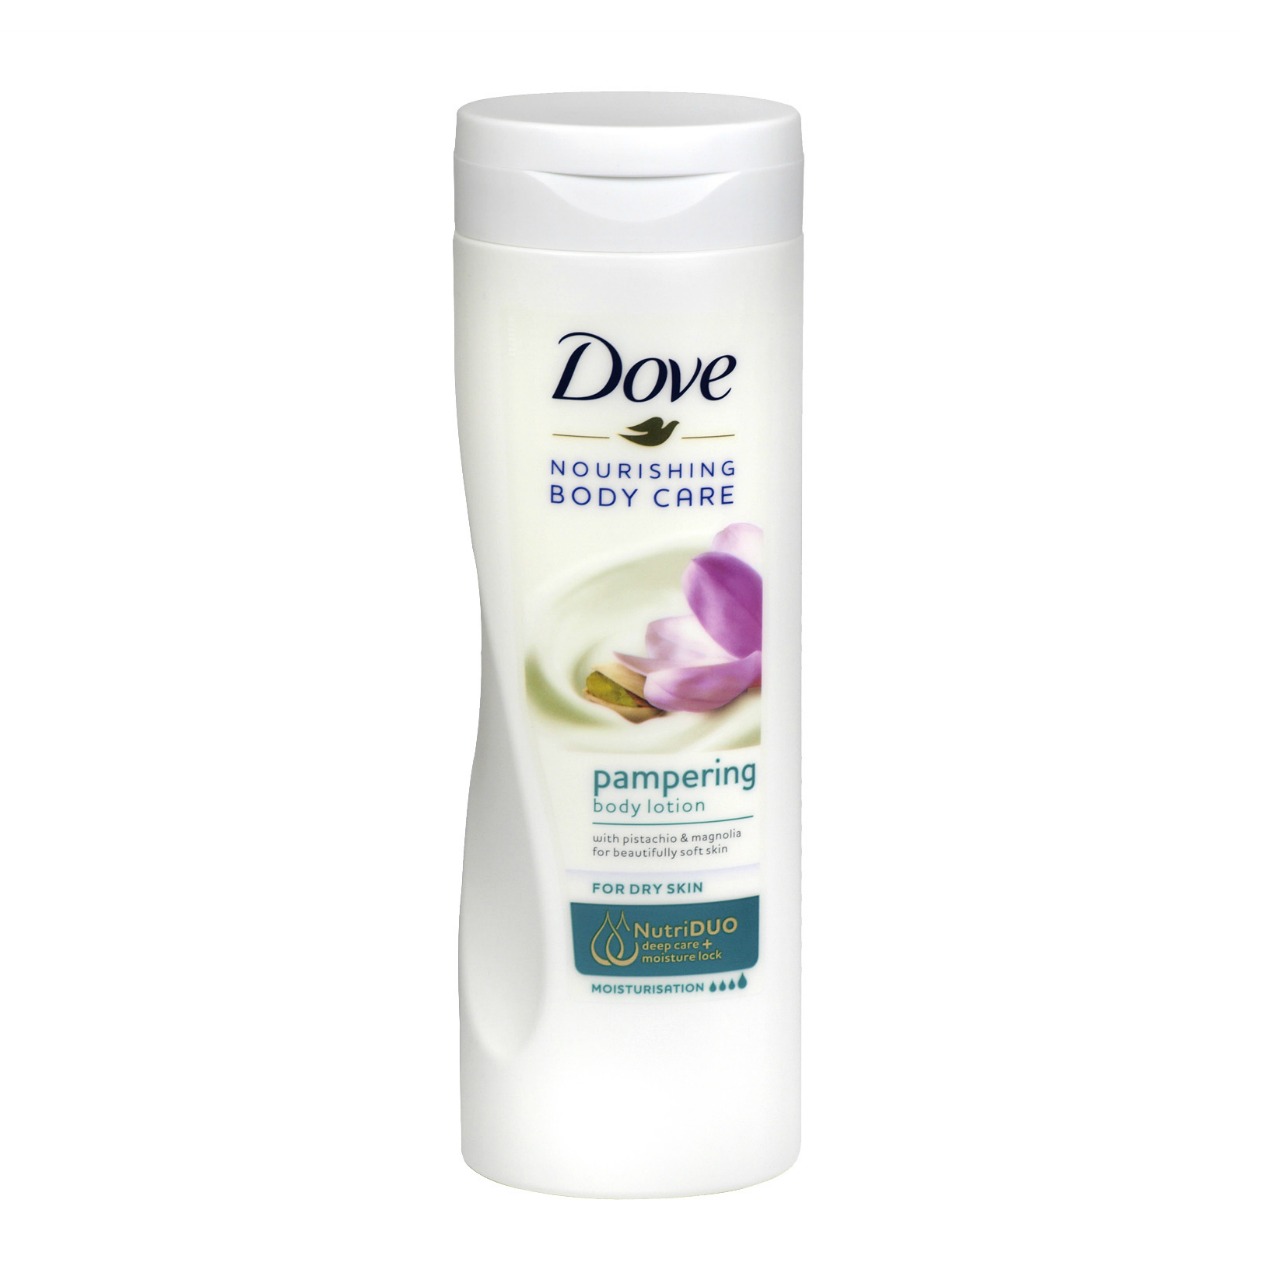 Dove Nourishing Body Care Pampering With Pistachio And Magnolia Body Lotion Cont Net 400ml Bestdeal Shop Com